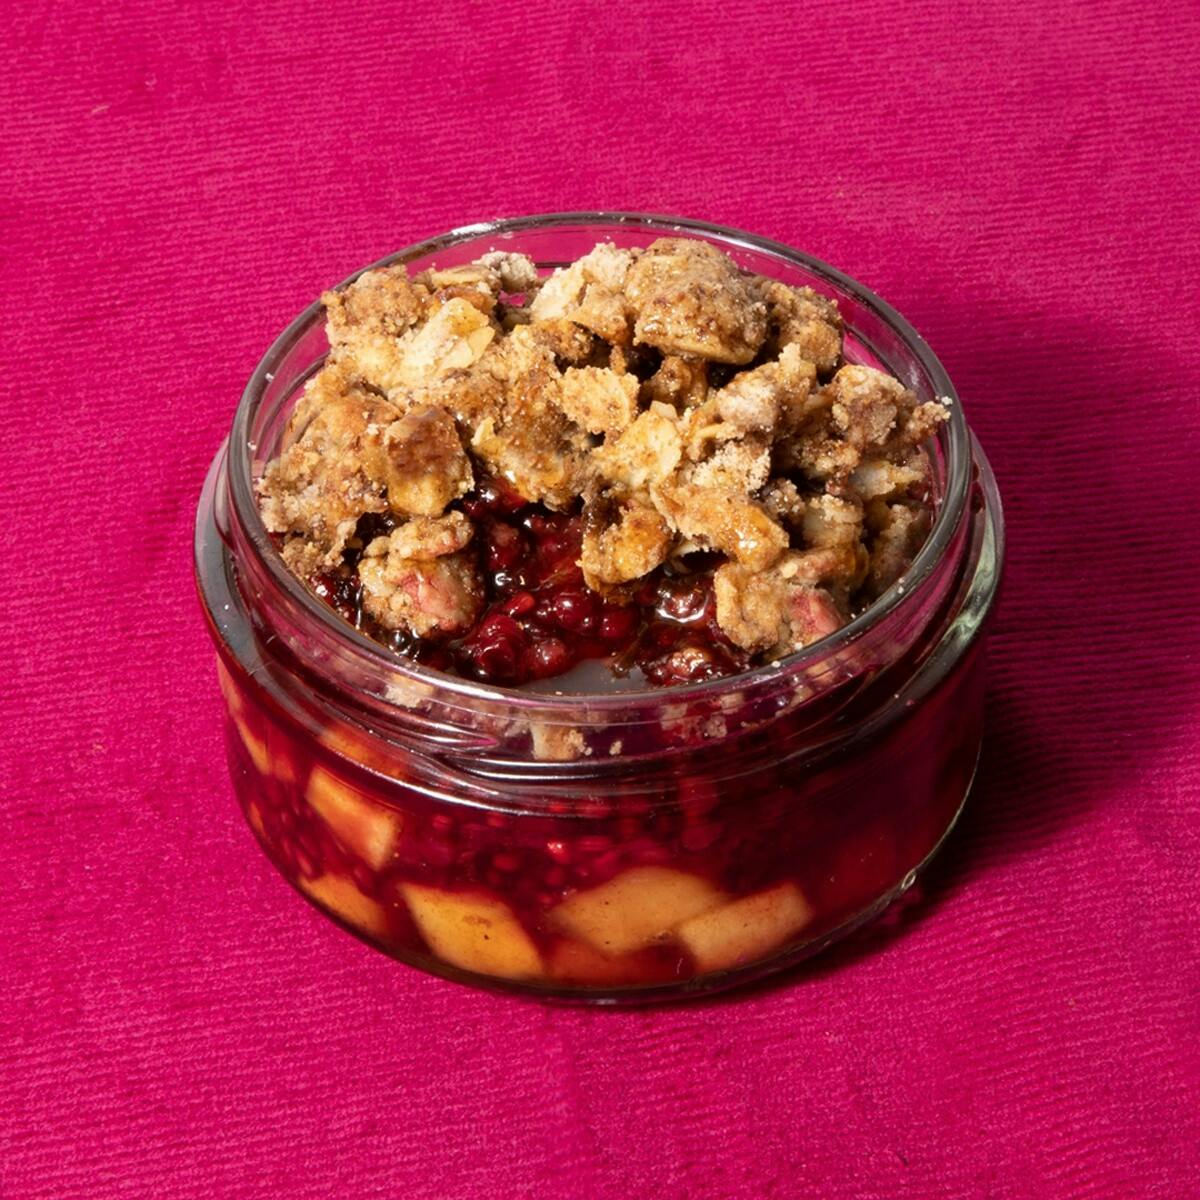 Golden Apple and Blackberry Crumble